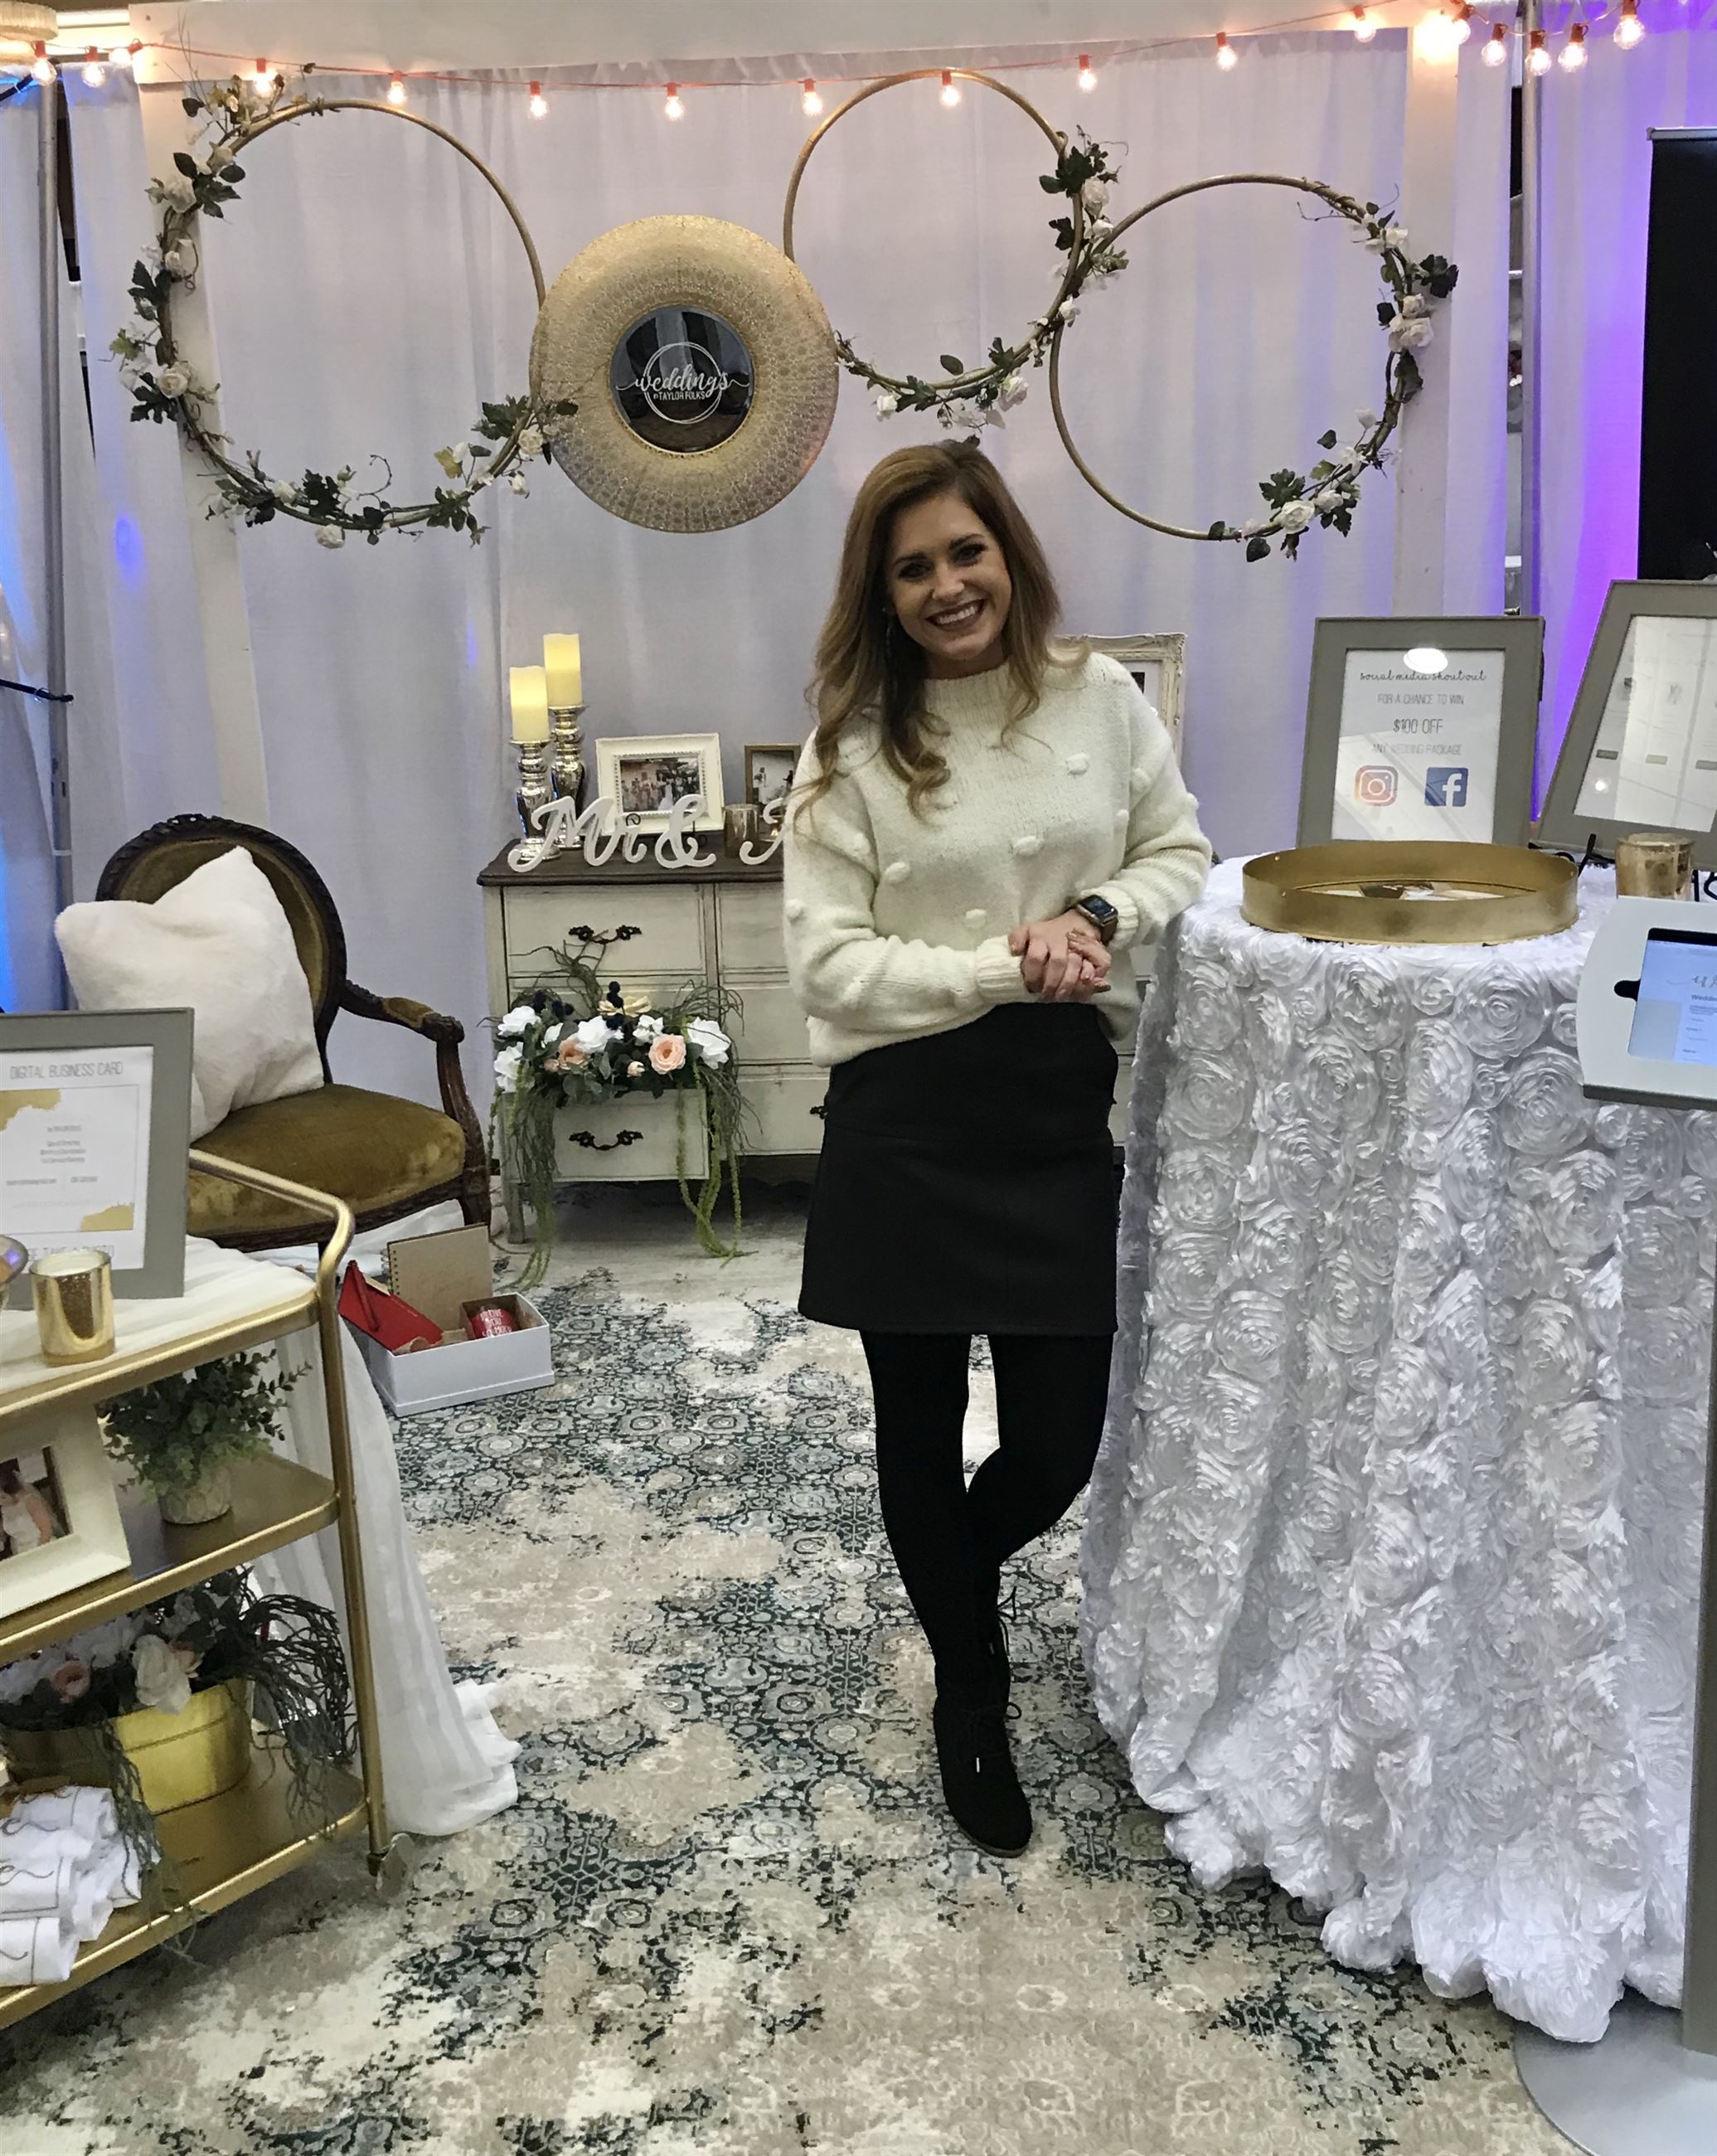 Photo of the girl posing near the bridal stand